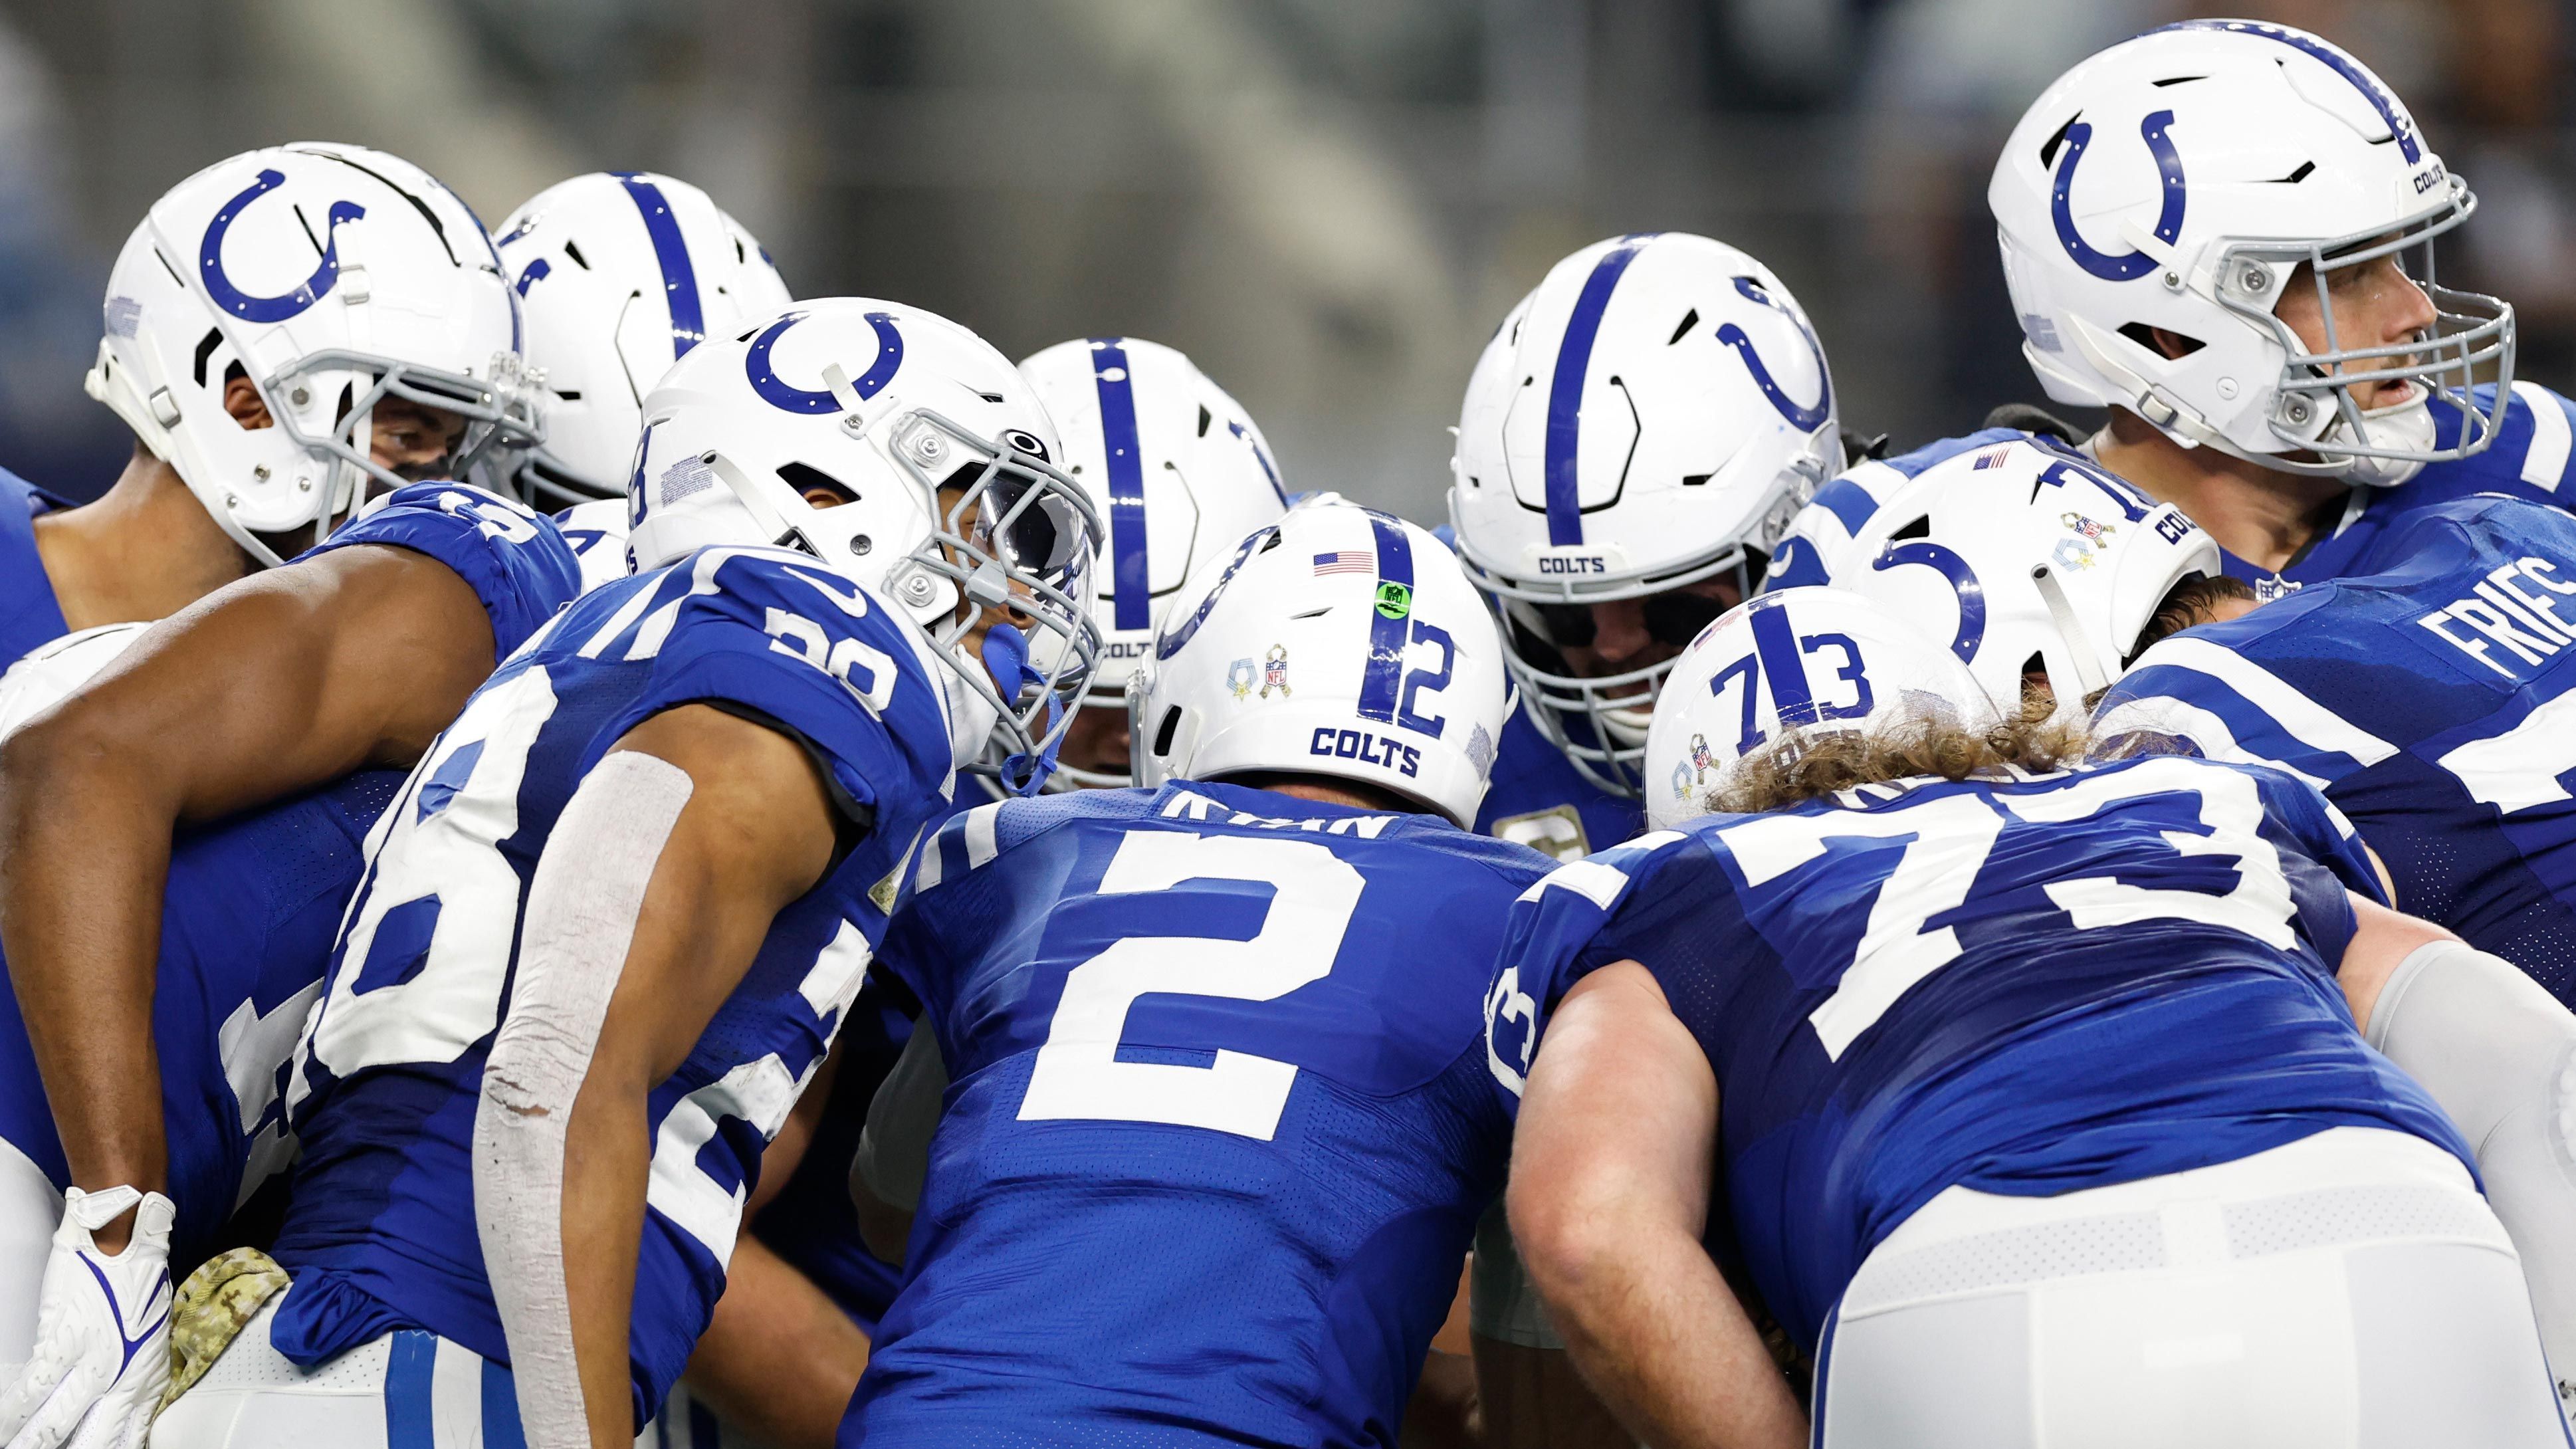 
                <strong>Sieben Picks: Indianapolis Colts</strong><br>
                &#x2022; Runde 1<br>&#x2022; Runde 2<br>&#x2022; Runde 3 (via Washington Commanders)<br>&#x2022; Runde 4<br>&#x2022; Runde 5<br>&#x2022; Runde 6 (via Buffalo Bills)<br>&#x2022; Runde 7 (via Tampa Bay Buccaneers)<br>
              